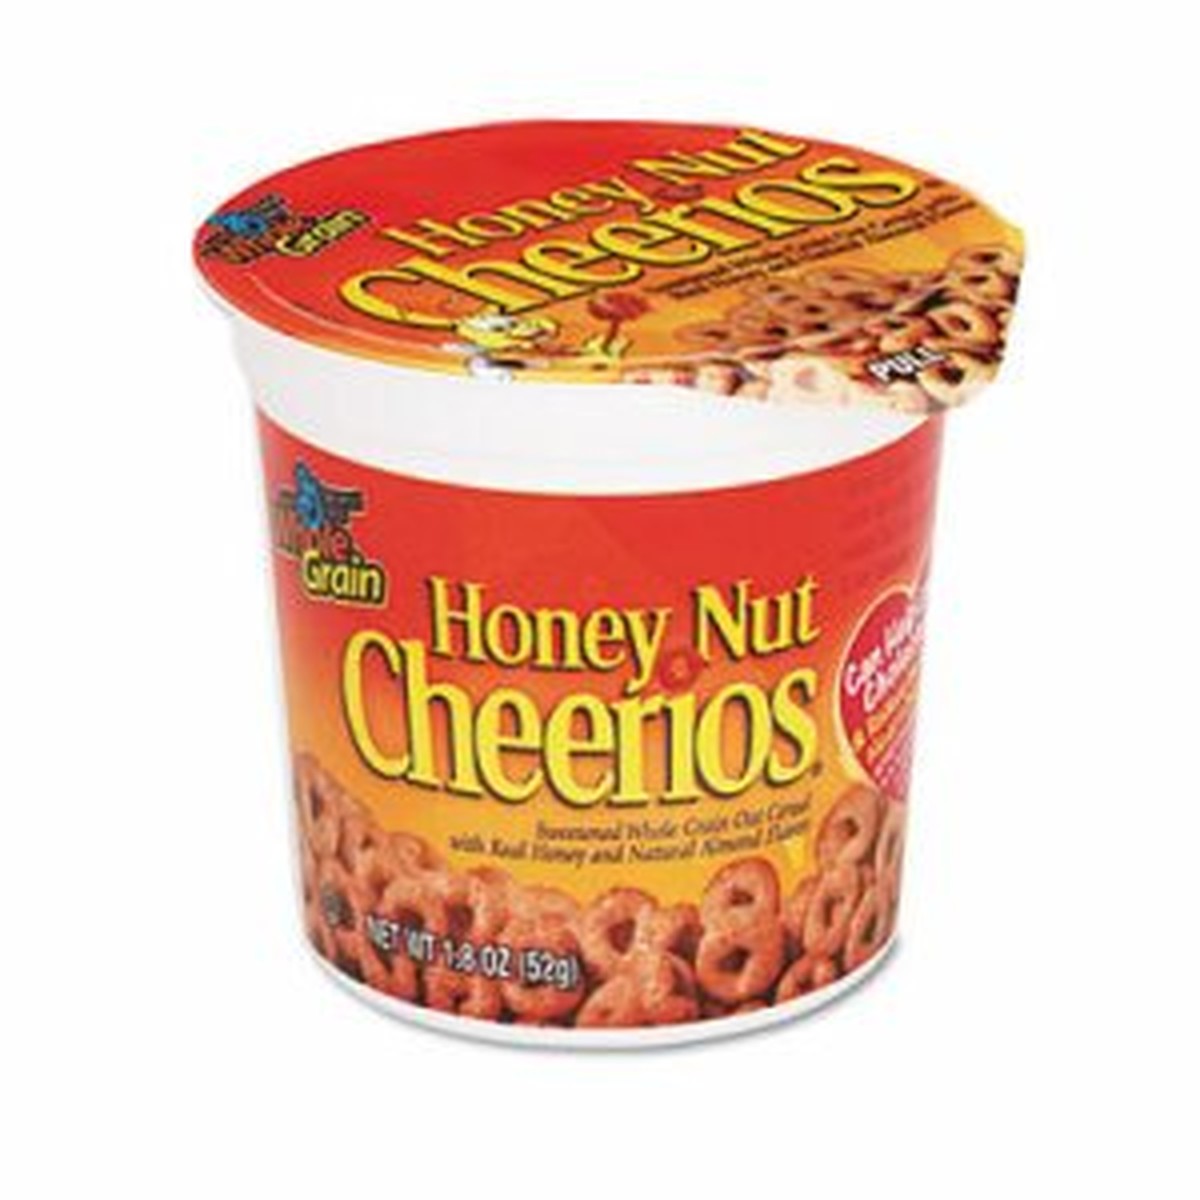 Honey Nut Cheerios Cereal, Single-Serve 1.8oz Cup, 6/Pack